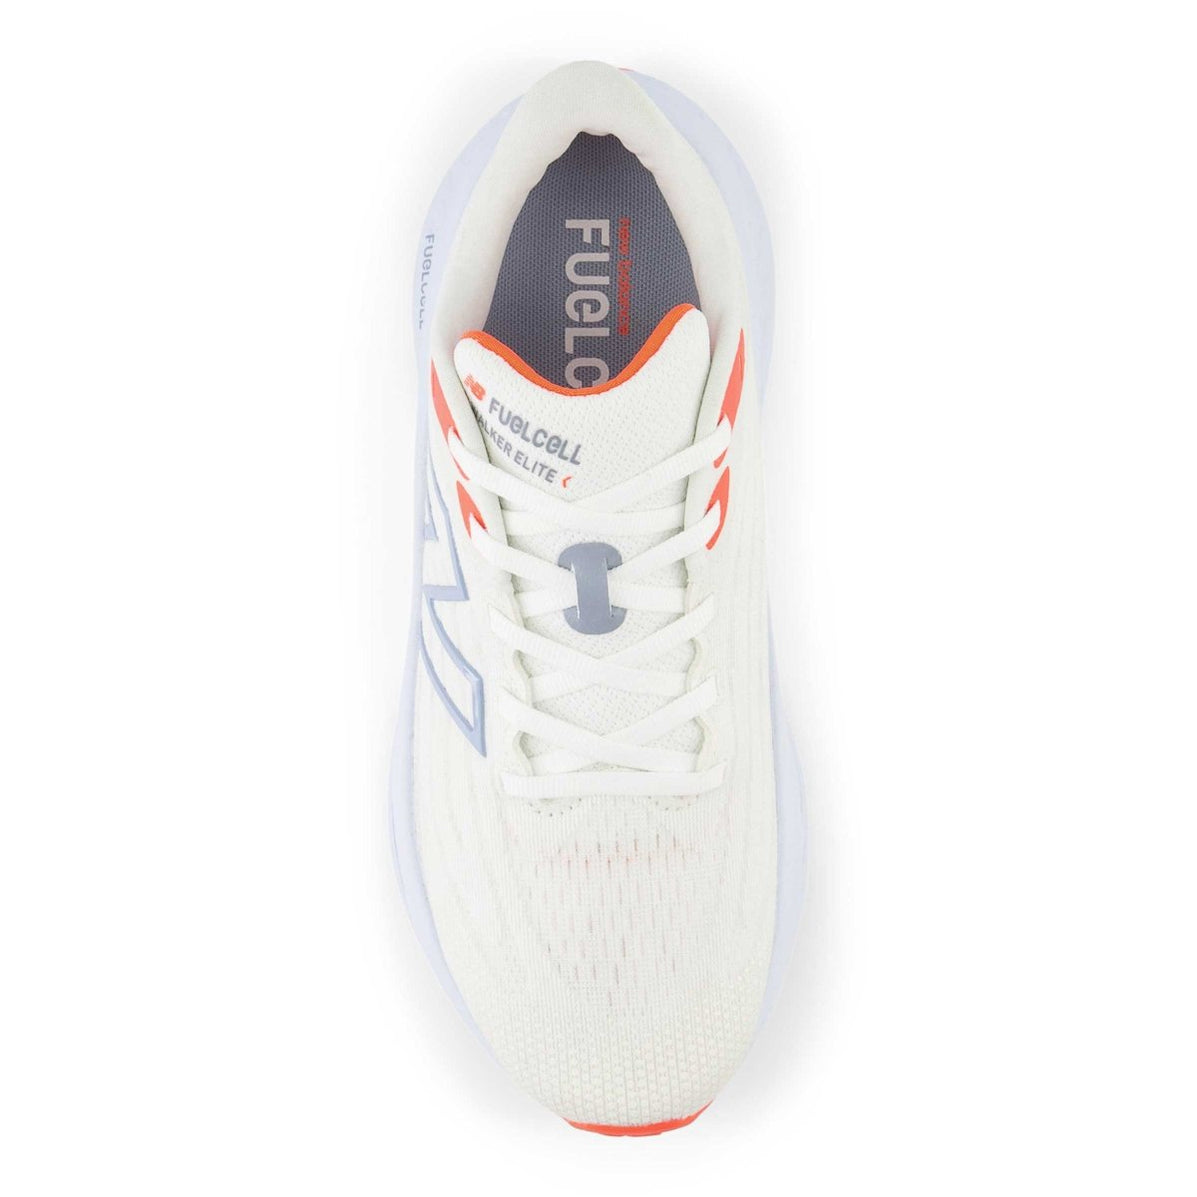 New Balance Women's Fuel Cell Walker White — Tip Top Shoes of New York